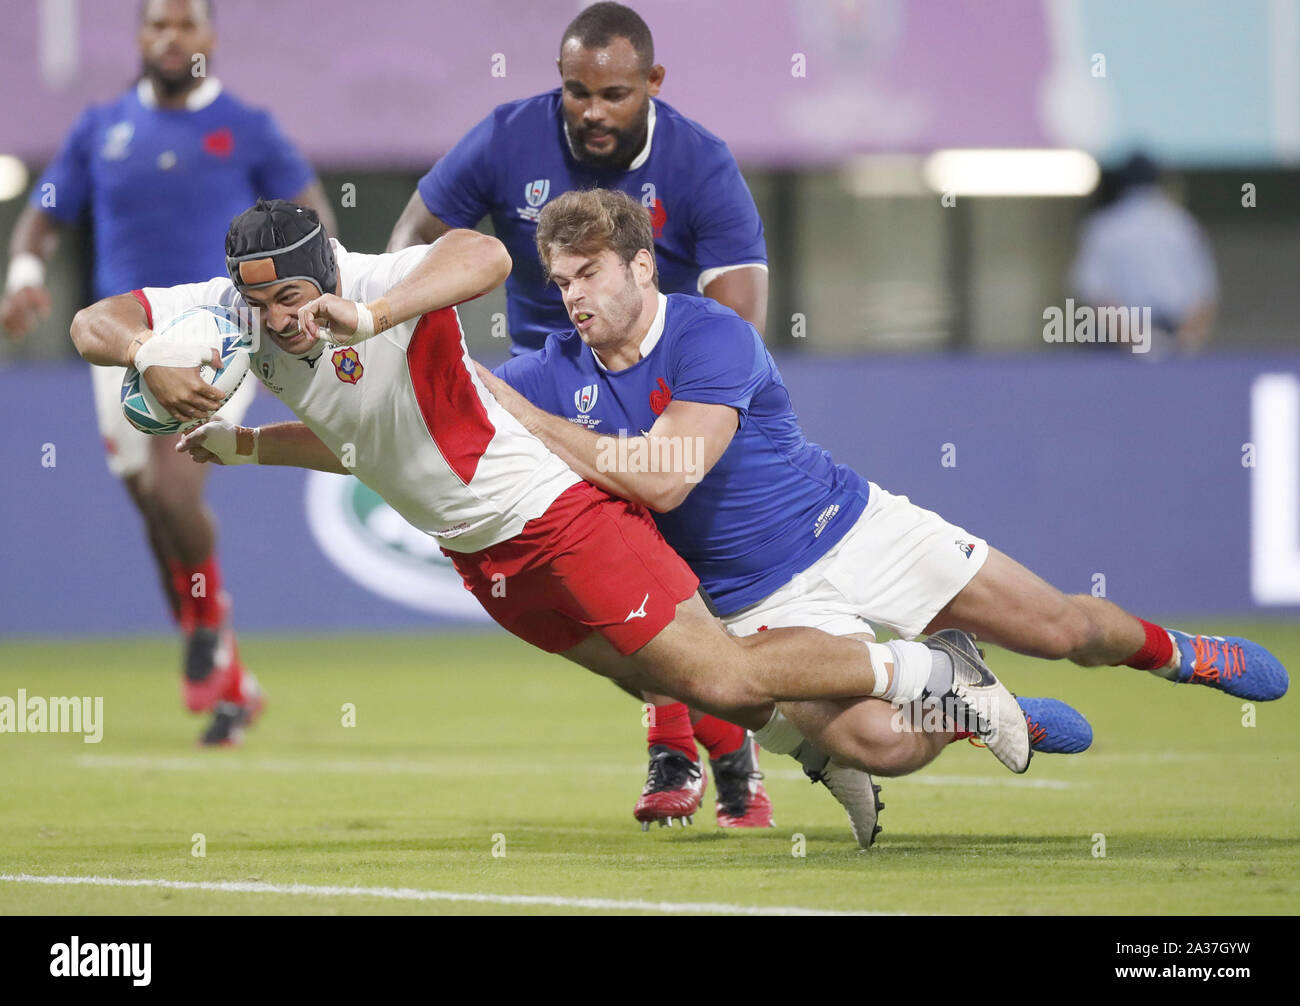 Kumamoto, Japan. 6th Oct, 2019. Malietoa Hingano of Tonga looks to score a  try during the second half of a Rugby World Cup Pool C match against France  on Oct. 6, 2019,